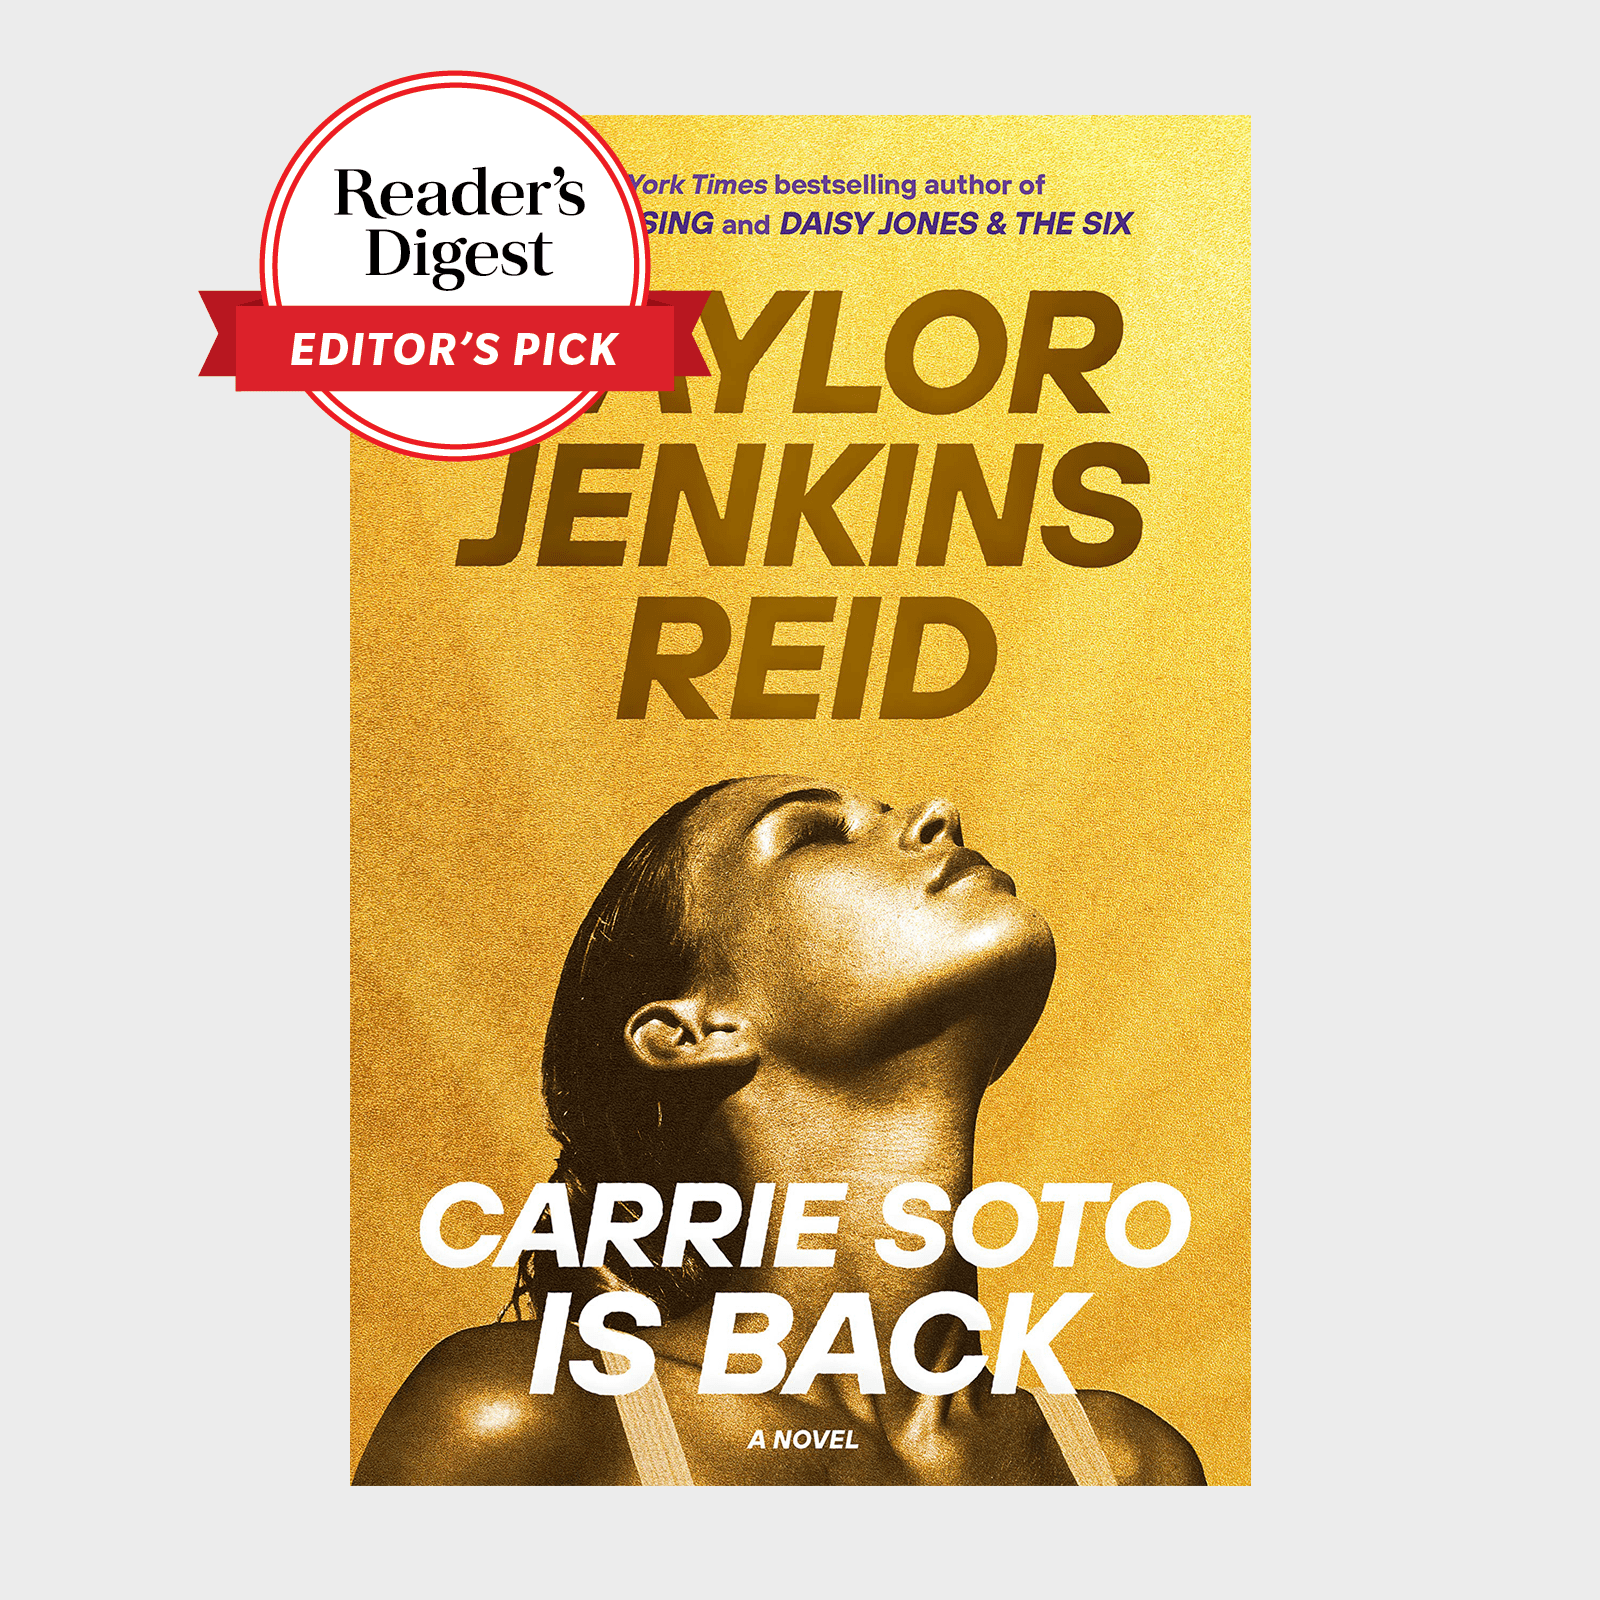 <p><strong>Release date:</strong> Aug. 30, 2022</p> <p><a href="https://www.amazon.com/Carrie-Soto-Back-Taylor-Jenkins/dp/0593158687" rel="noopener noreferrer">Here's one</a> for the sports fans, the athletes and anyone who knows what it's like to put everything on the line for ambition. Taylor Jenkins Reid's beloved tennis hero Carrie Soto is back. This time, she's decided to leave her early retirement and take a stab at one more win. But of course, the world of sports moves quickly. At the age of 37, can Carrie pull off another triumph? With themes of ambition, sacrifice and self-doubt, plus a sizzle of romance, this book deserves a spot on your 2022 must-read list.</p> <p class="listicle-page__cta-button-shop"><a class="shop-btn" href="https://www.amazon.com/Carrie-Soto-Back-Taylor-Jenkins/dp/0593158687">Shop Now</a></p>